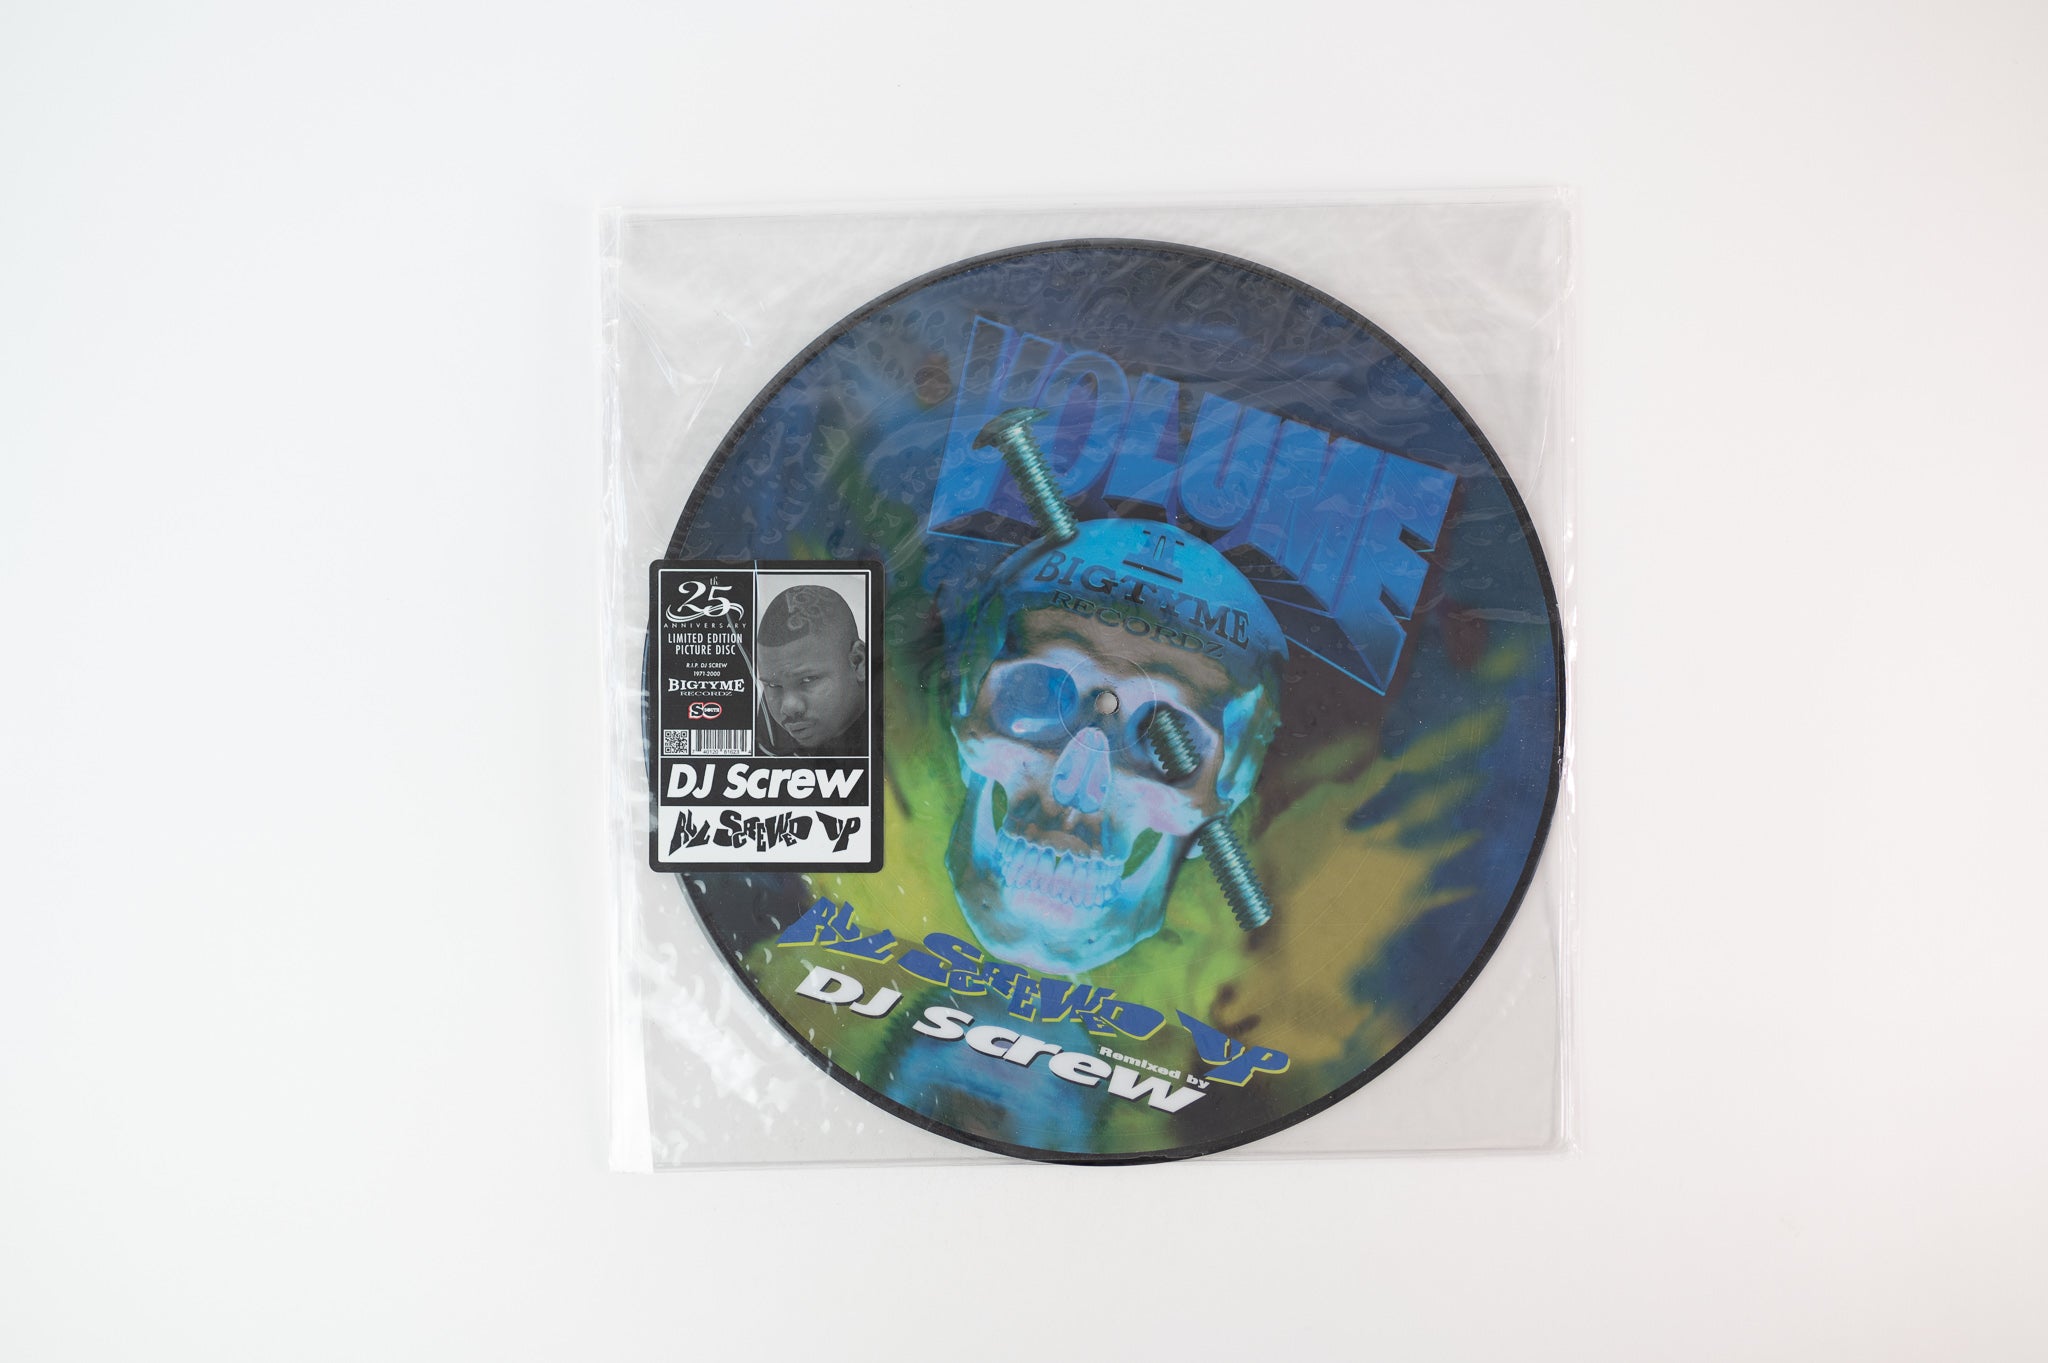 DJ Screw - Bigtyme Vol II All Screwed Up on Bigtyme Limited Picture Disc